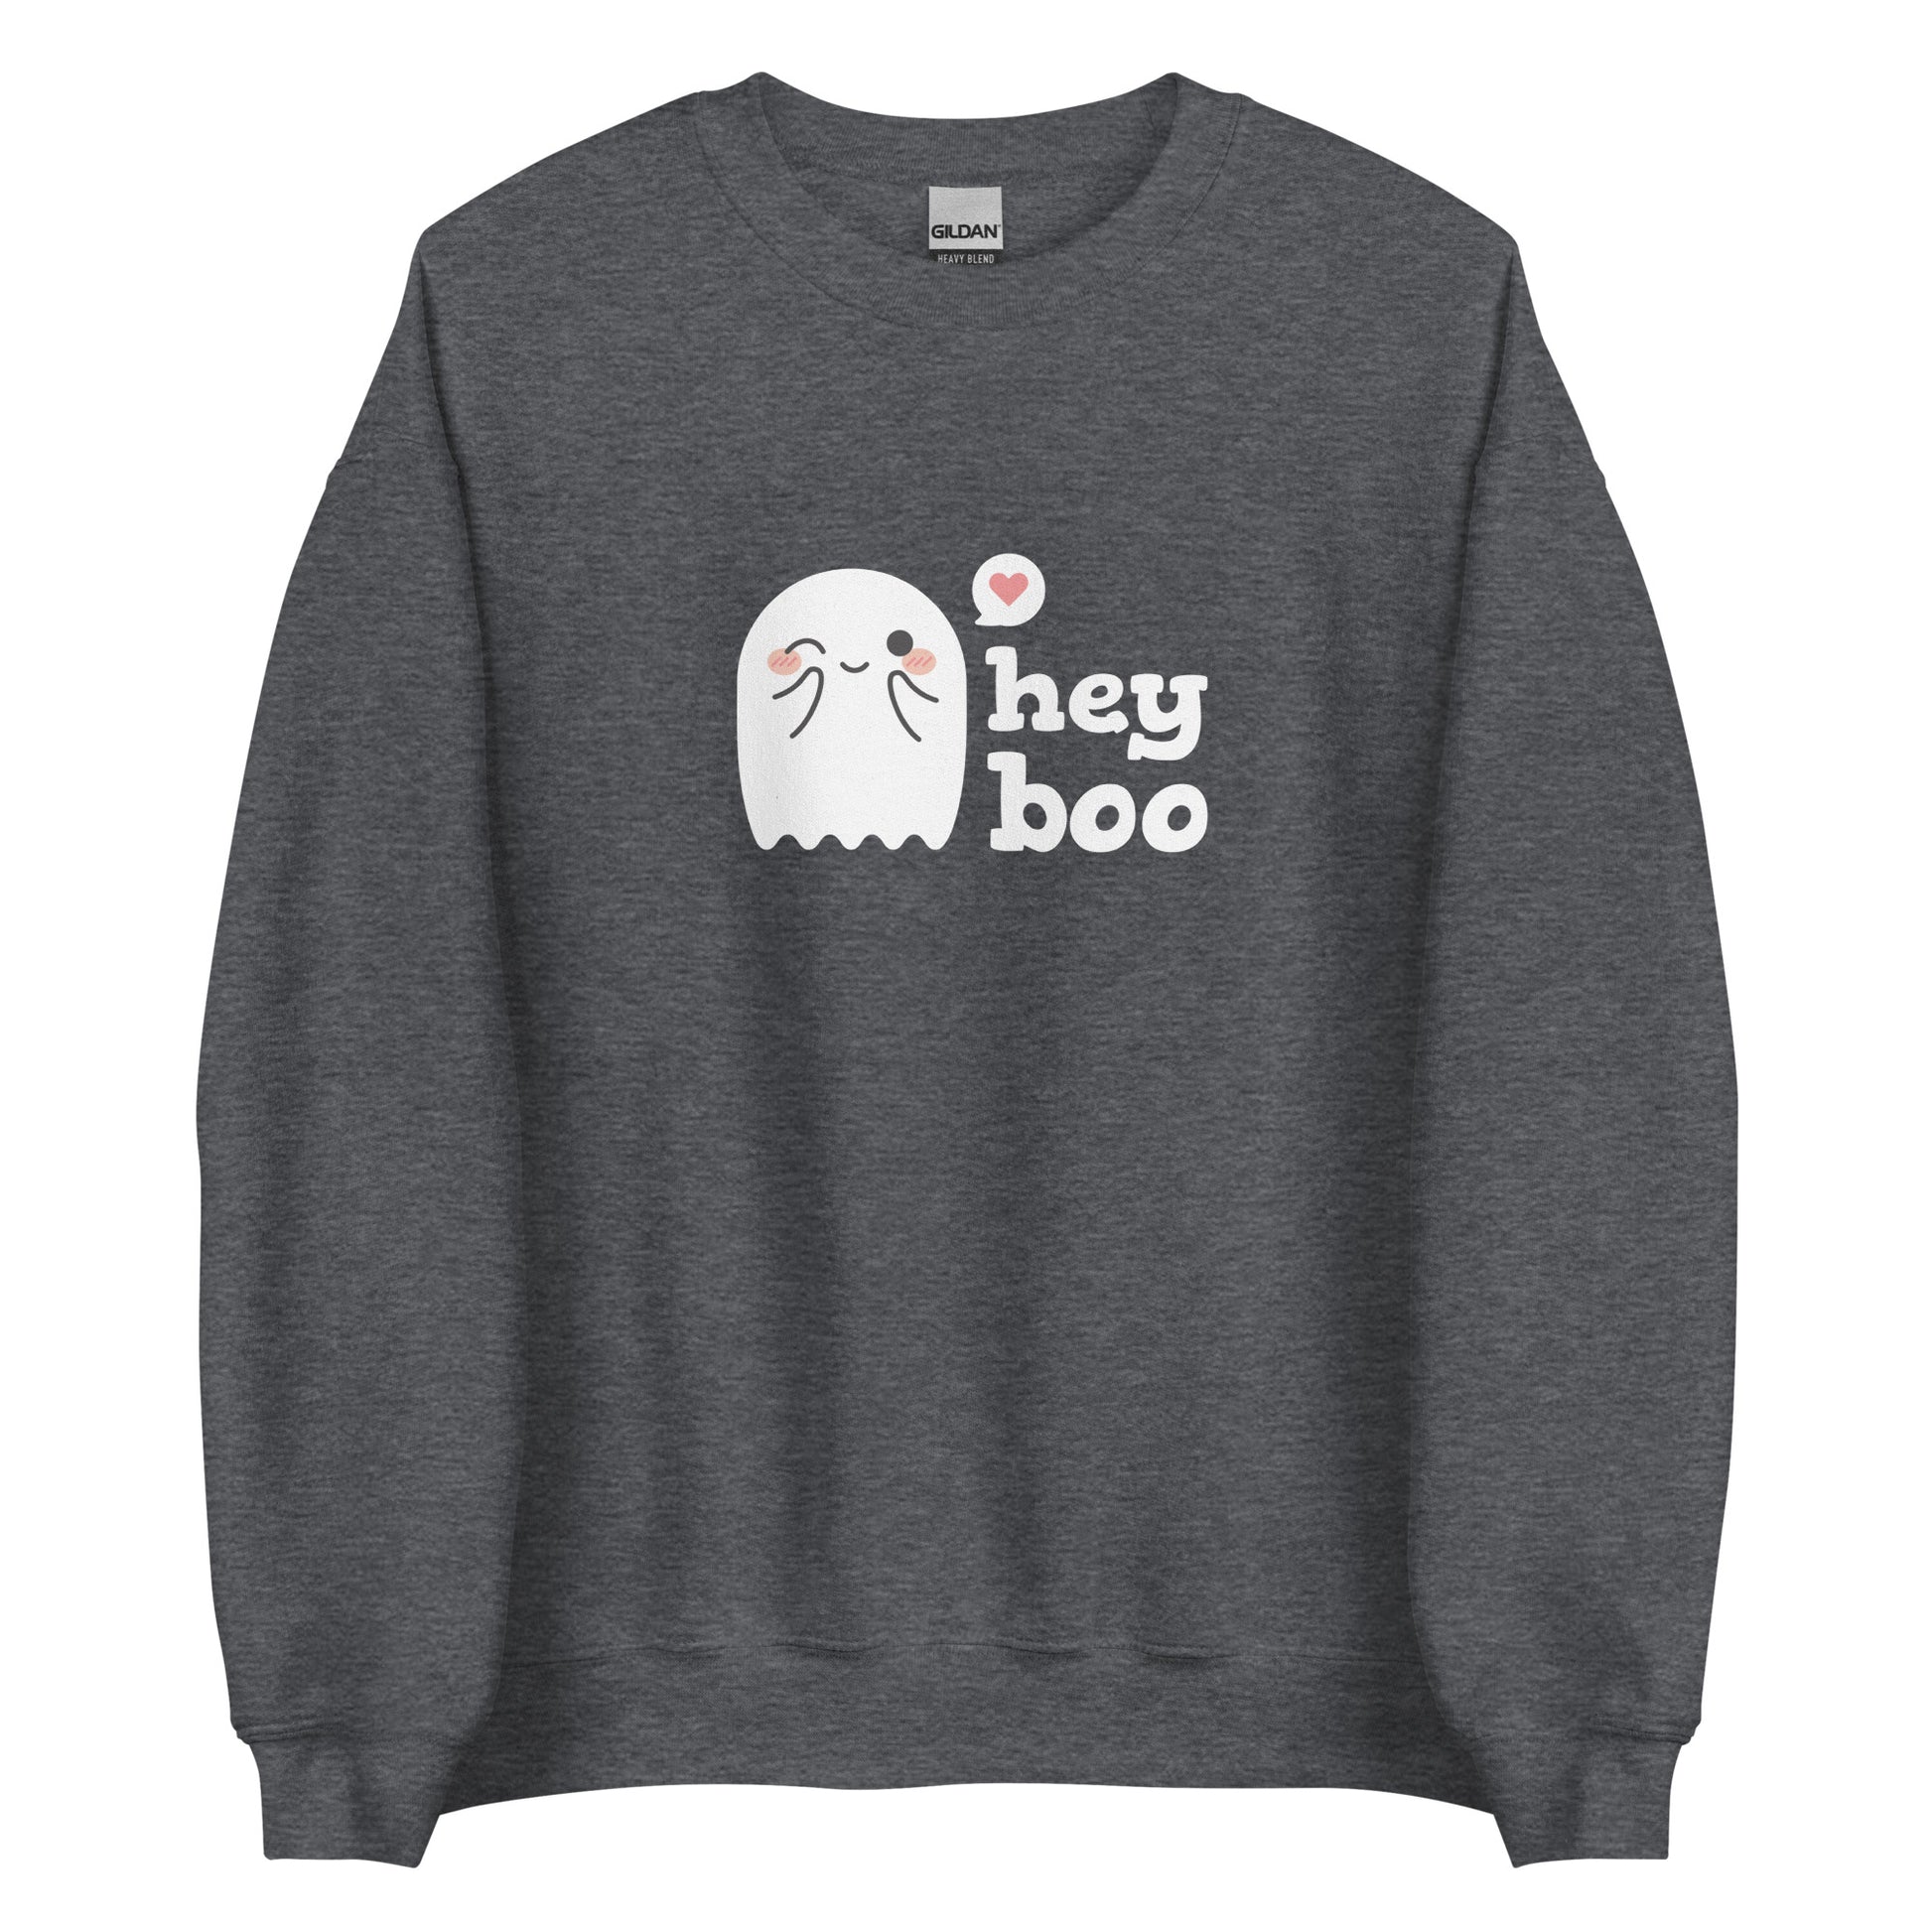 A grey crewneck sweatshirt featuring an image of a cute smiling and blushing ghost. Text alongside the ghost reads "hey boo"